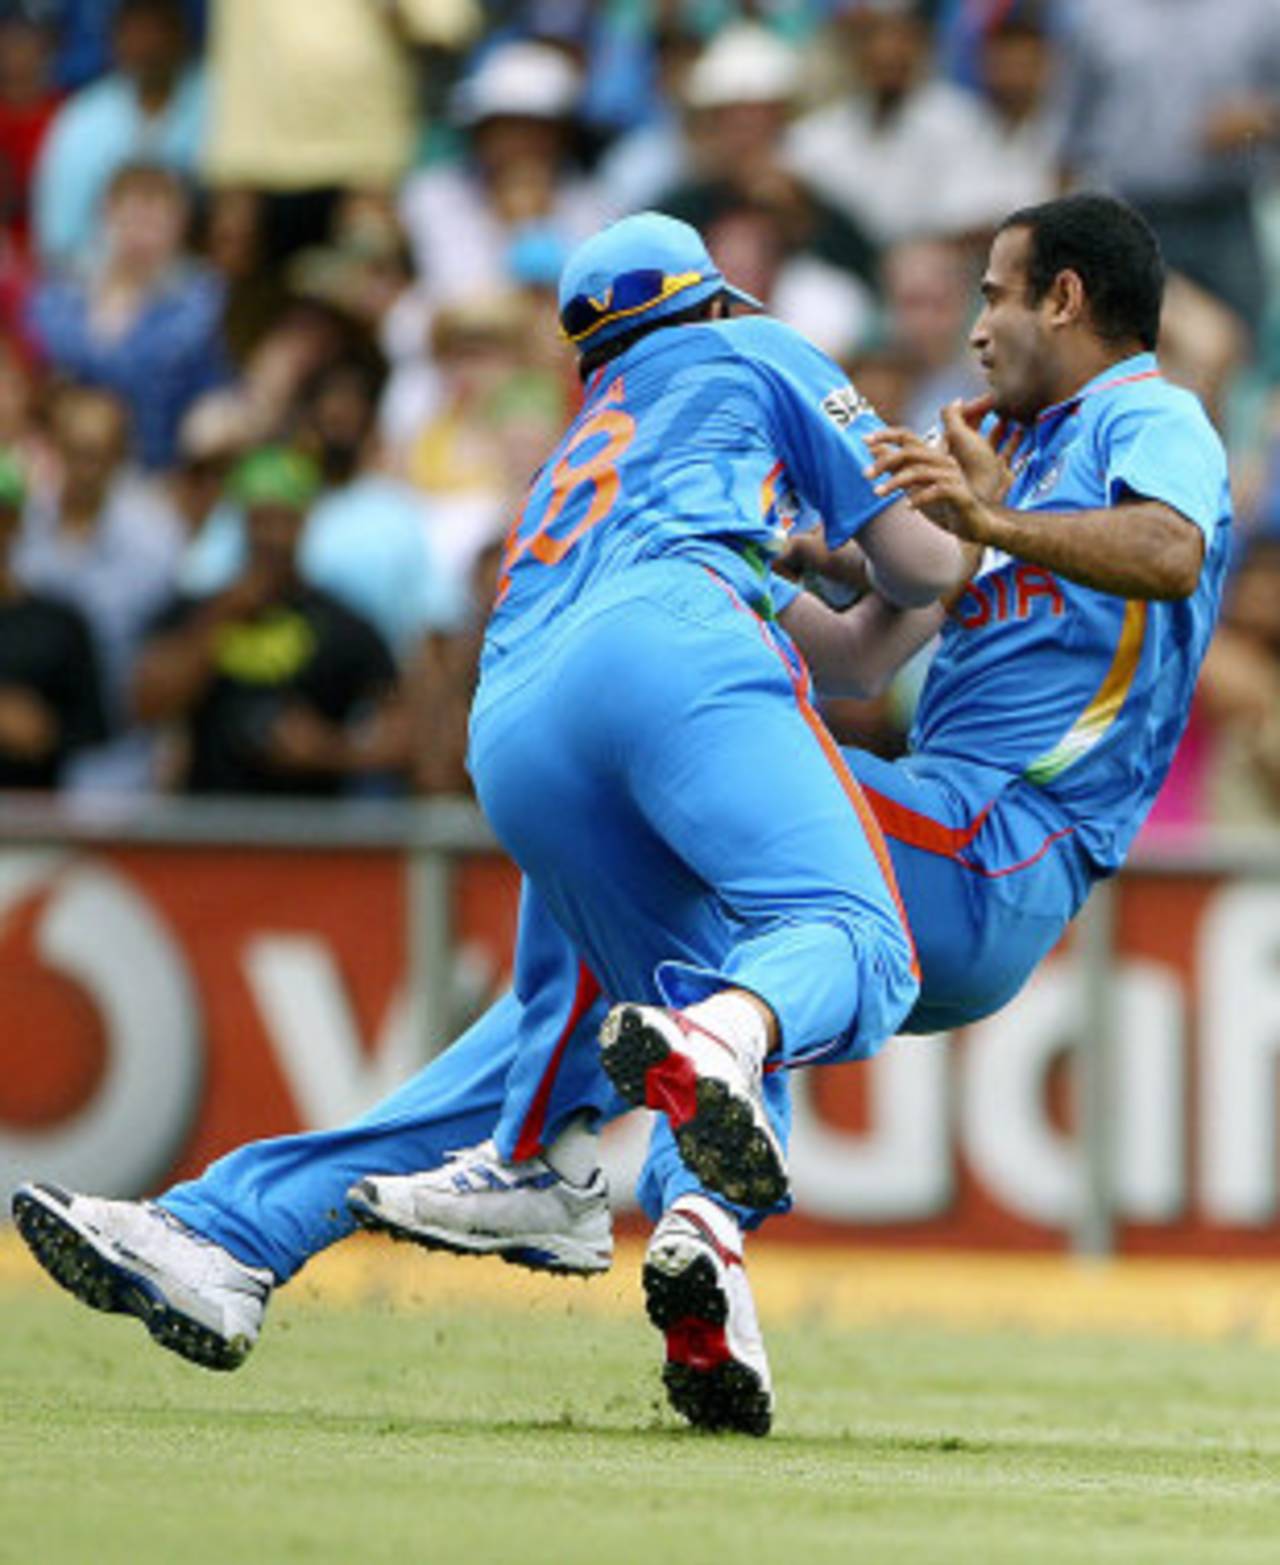 Suresh Raina collides with Irfan Pathan in the process of catching David Warner, Australia v India, CB Series, Sydney, February 26, 2012